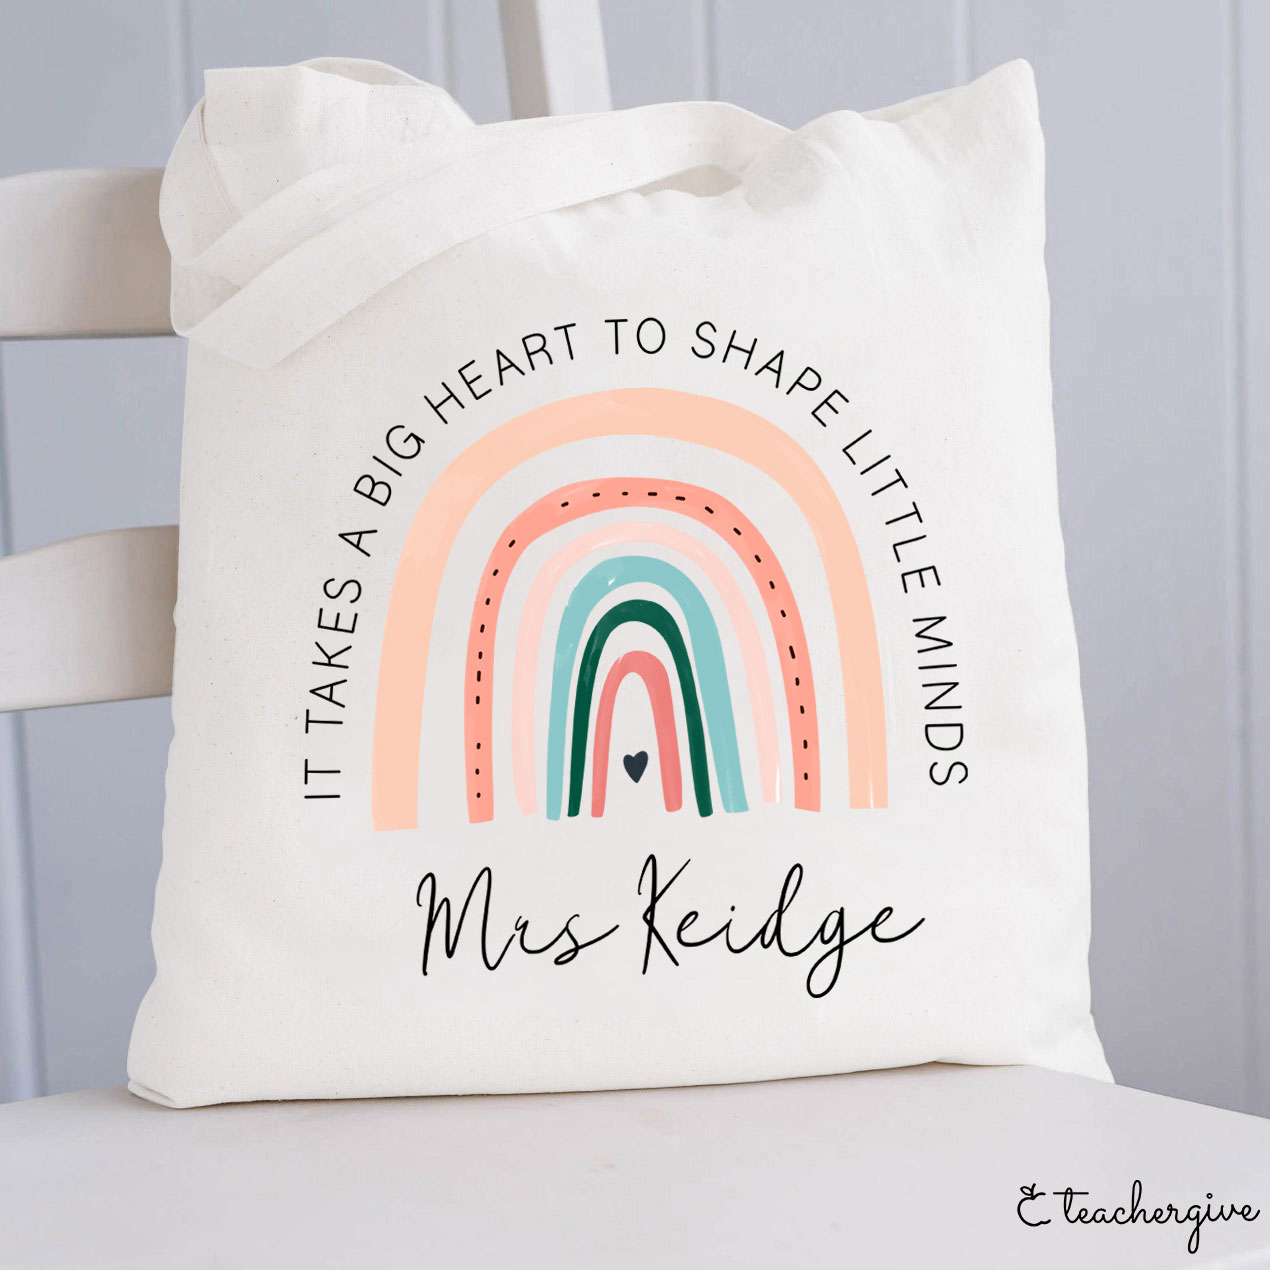 Personalized It Takes A Big Heart To Shape Little Minds Teacher Tote Bag